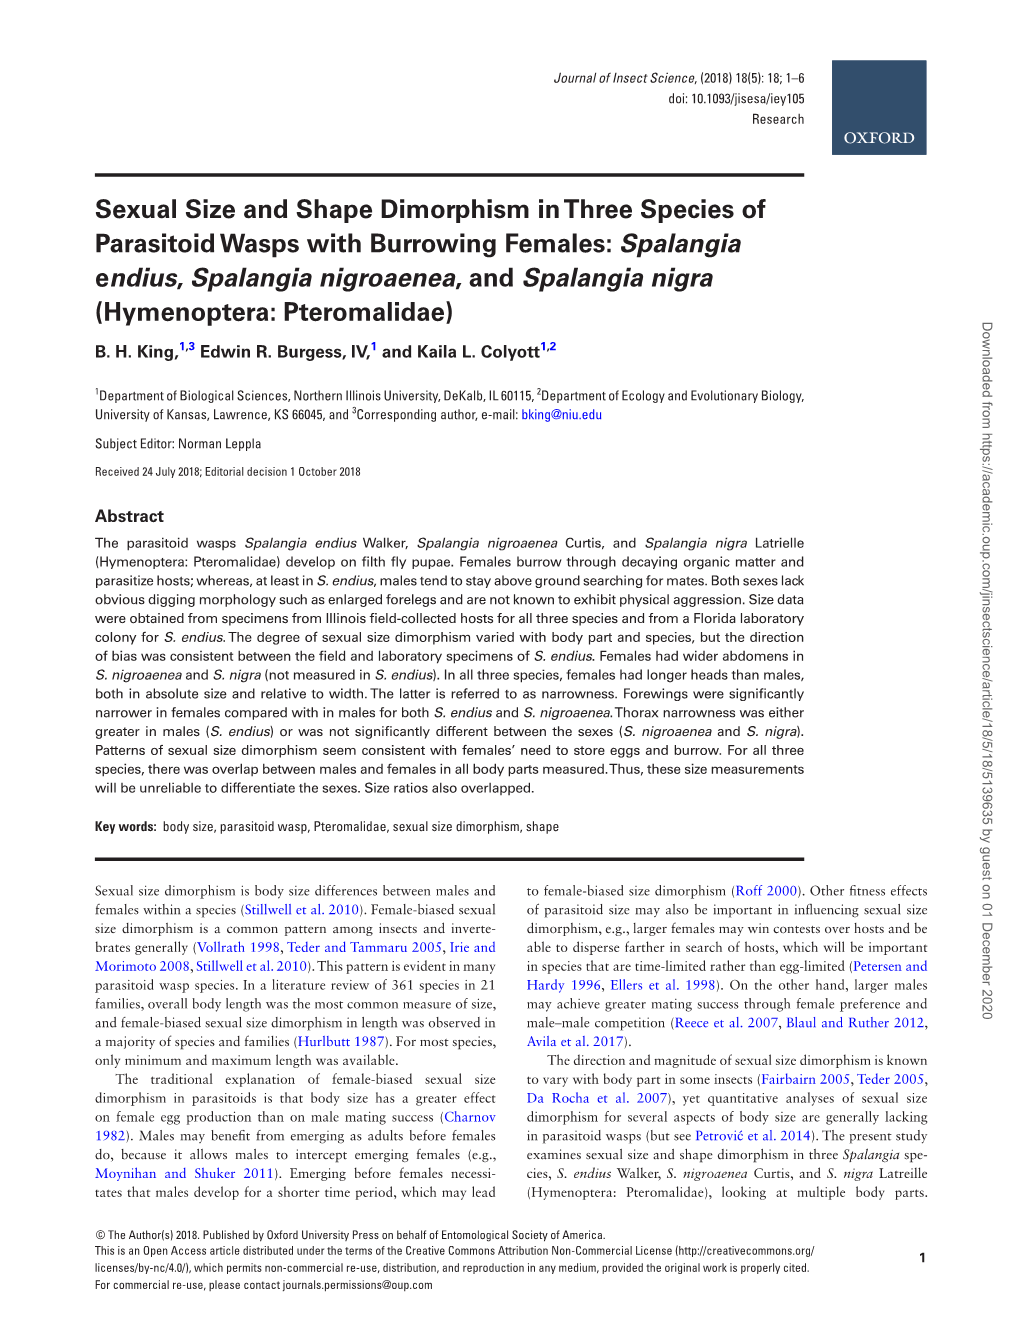 Sexual Size and Shape Dimorphism in Three Species of Parasitoid Wasps with Burrowing Females: Spalangia Endius, Spalangia Nigroaenea, and Spalangia Nigra